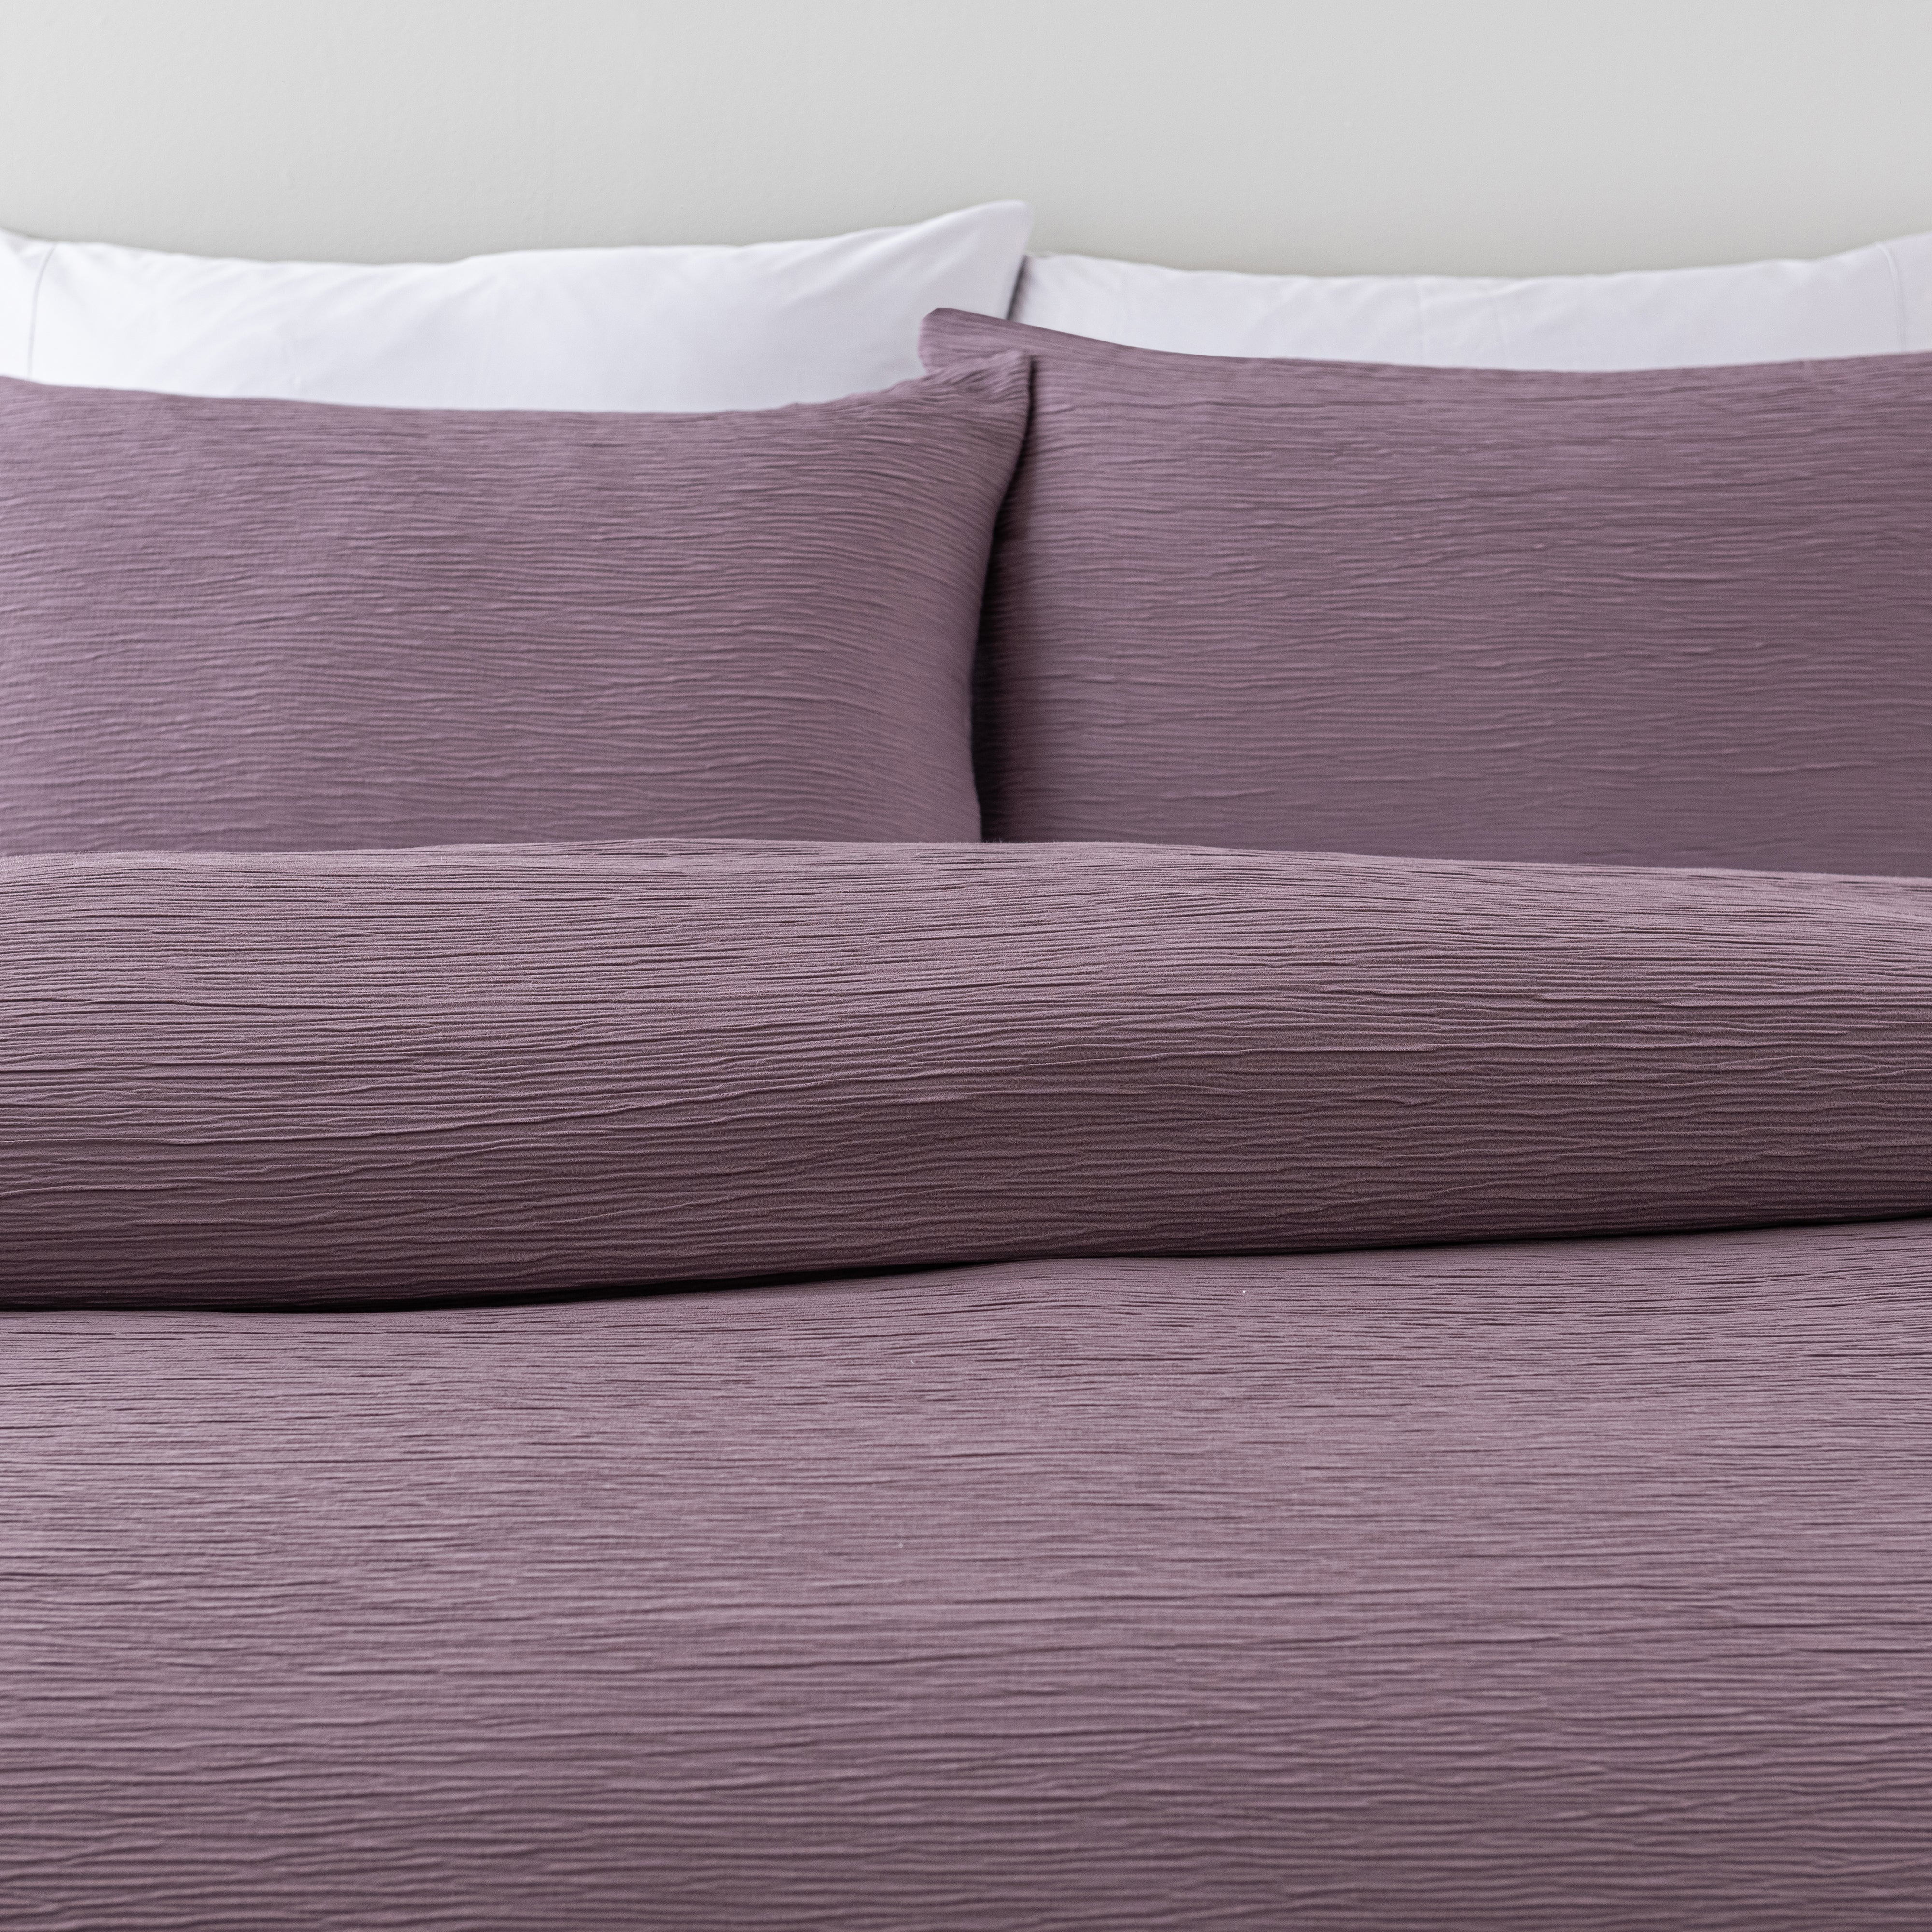 Alford Textured Thistle Duvet Cover and Pillowcase Set | Dunelm